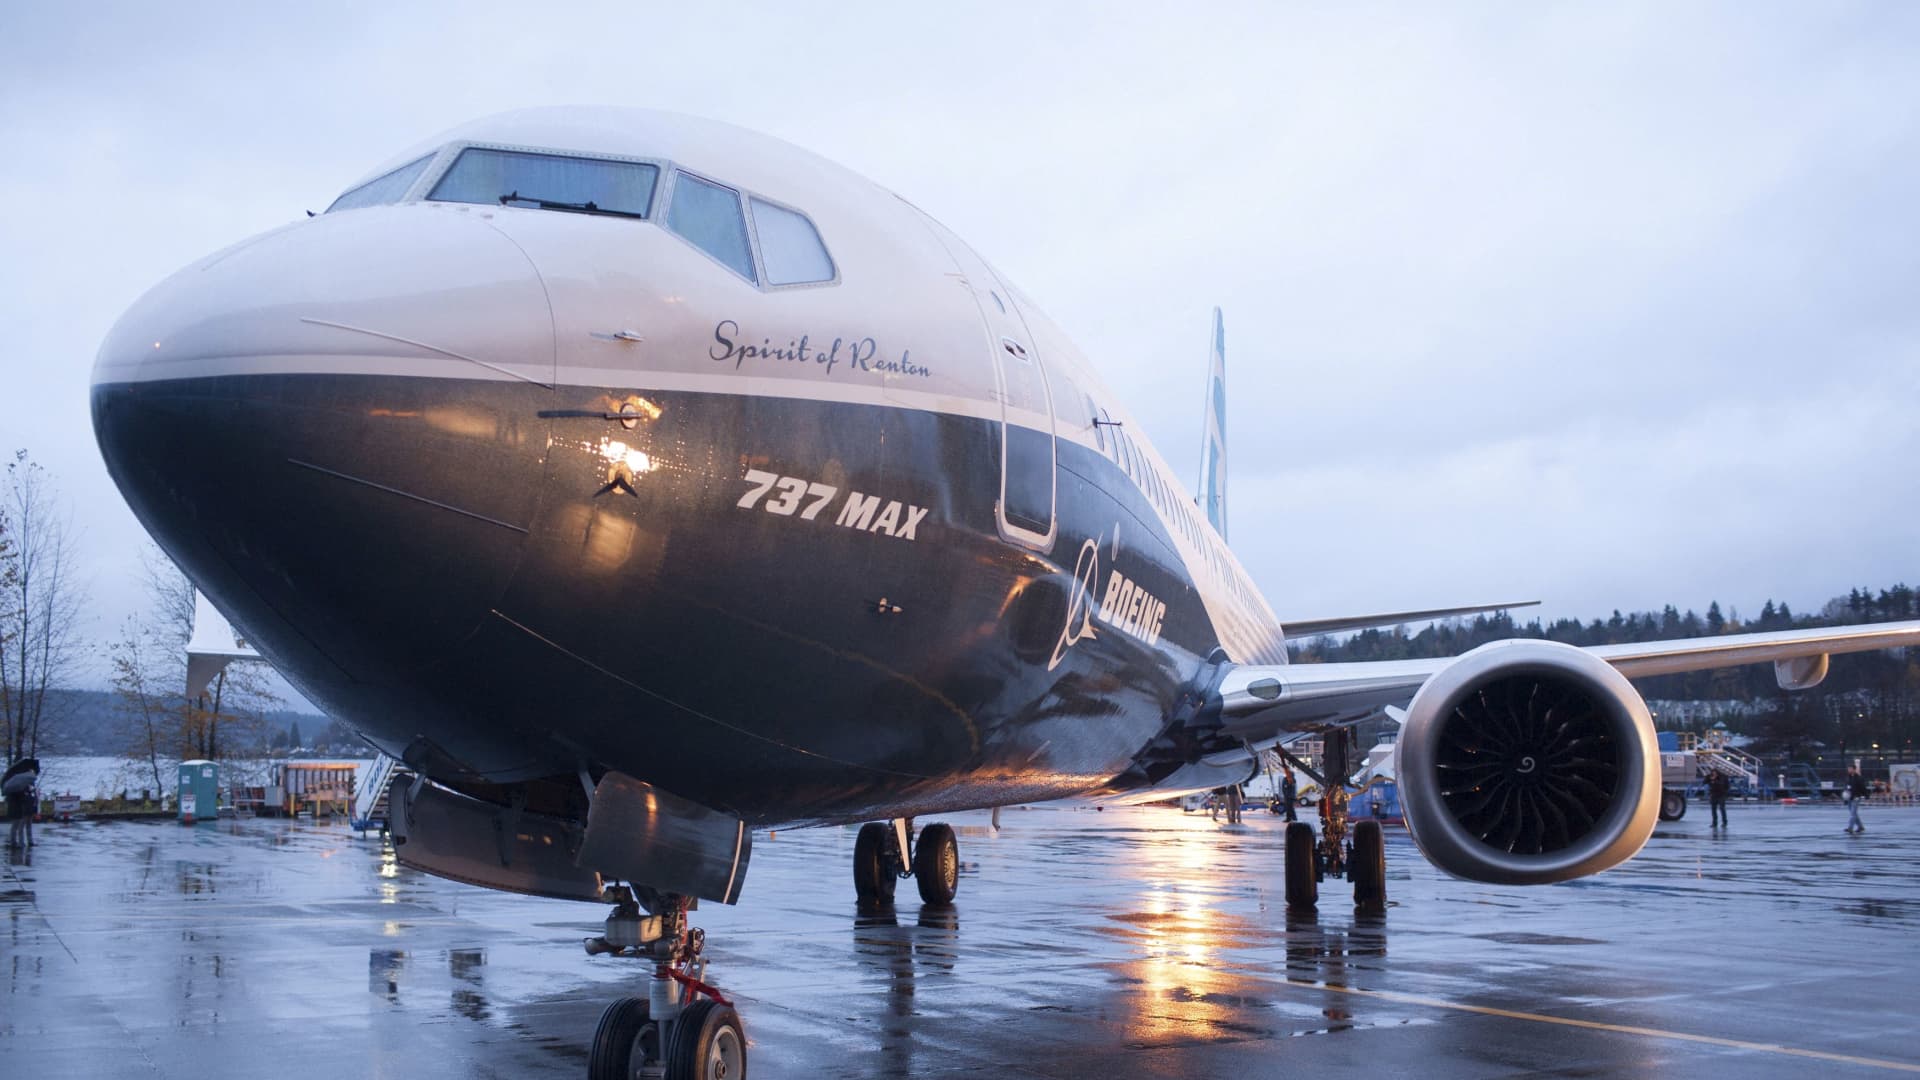 Boeing’s plane deliveries slipped in October on 737 fuselage flaw